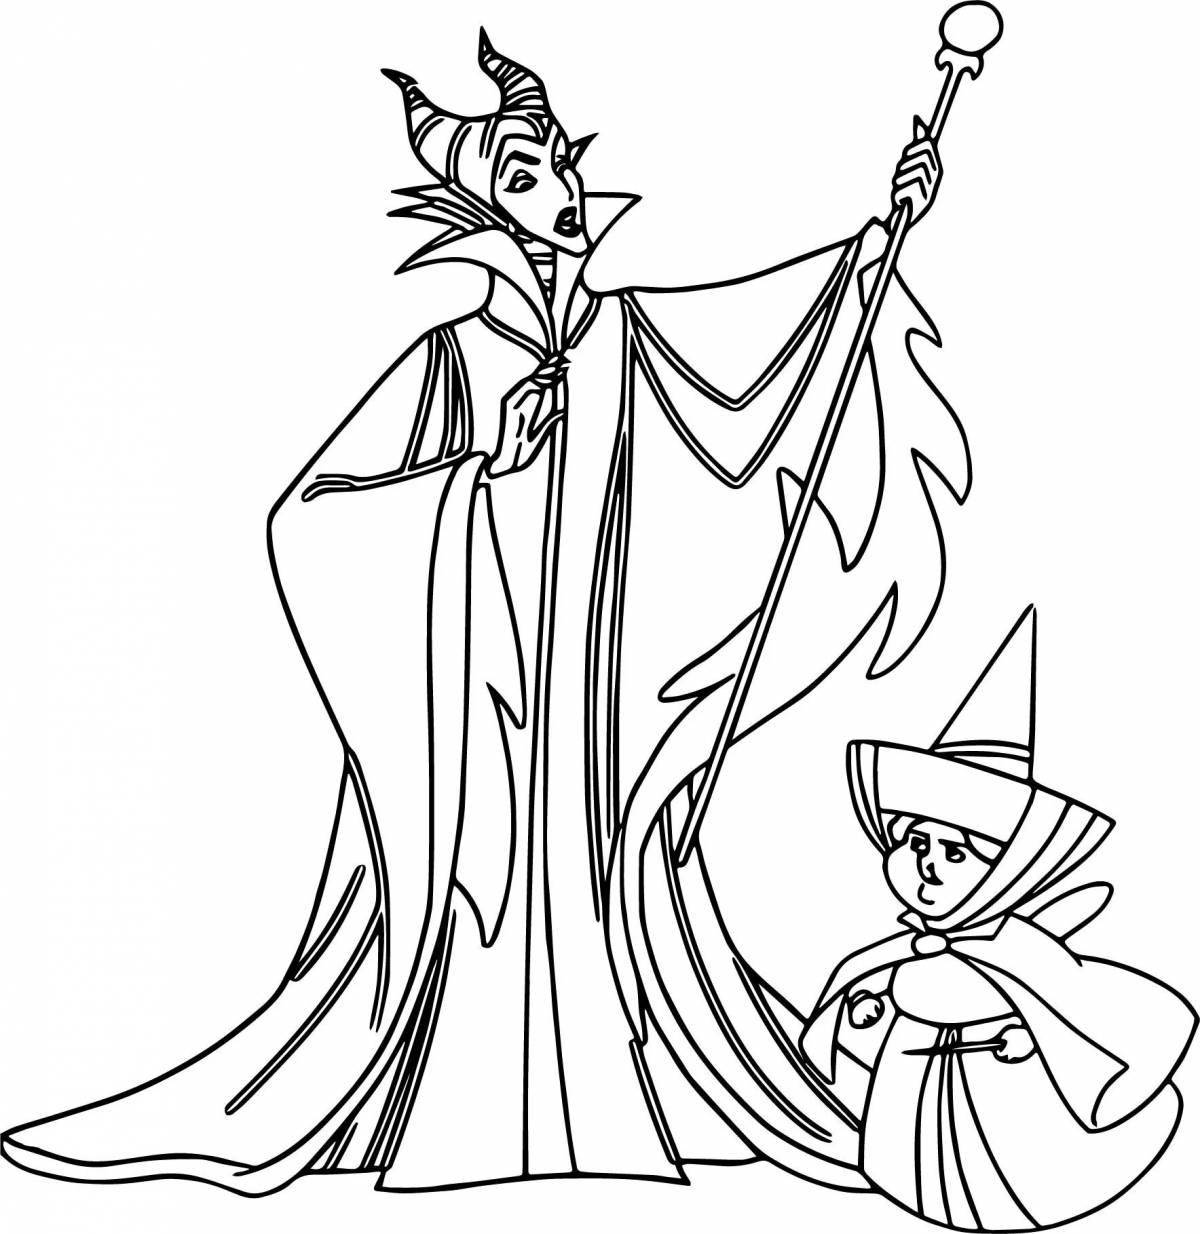 Maleficent coloring book for kids